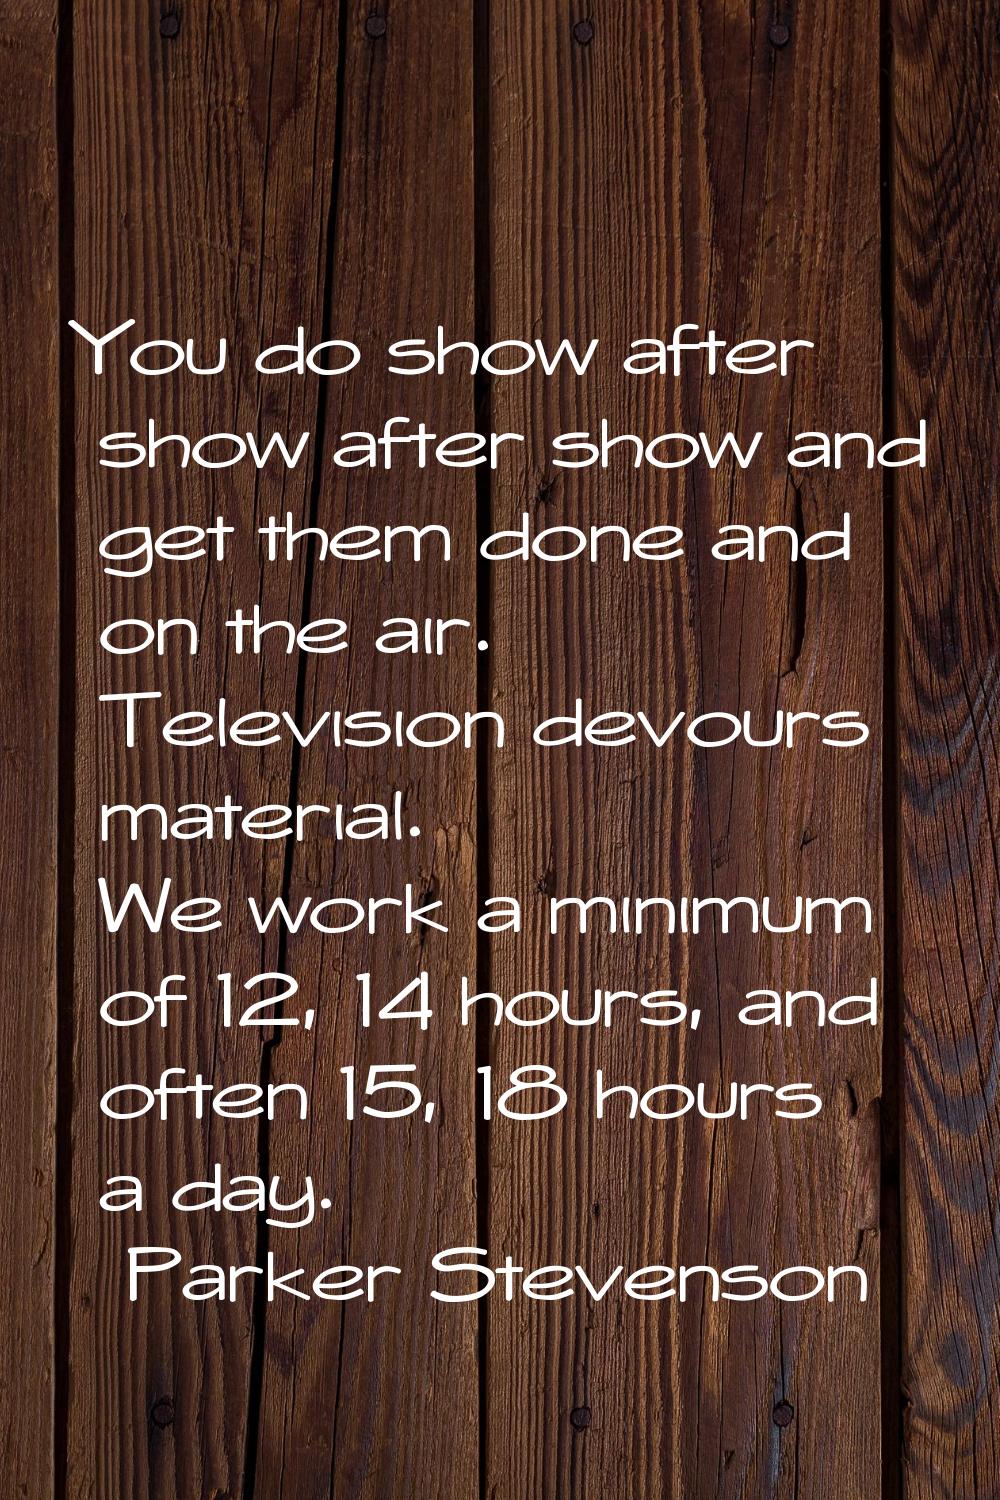 You do show after show after show and get them done and on the air. Television devours material. We